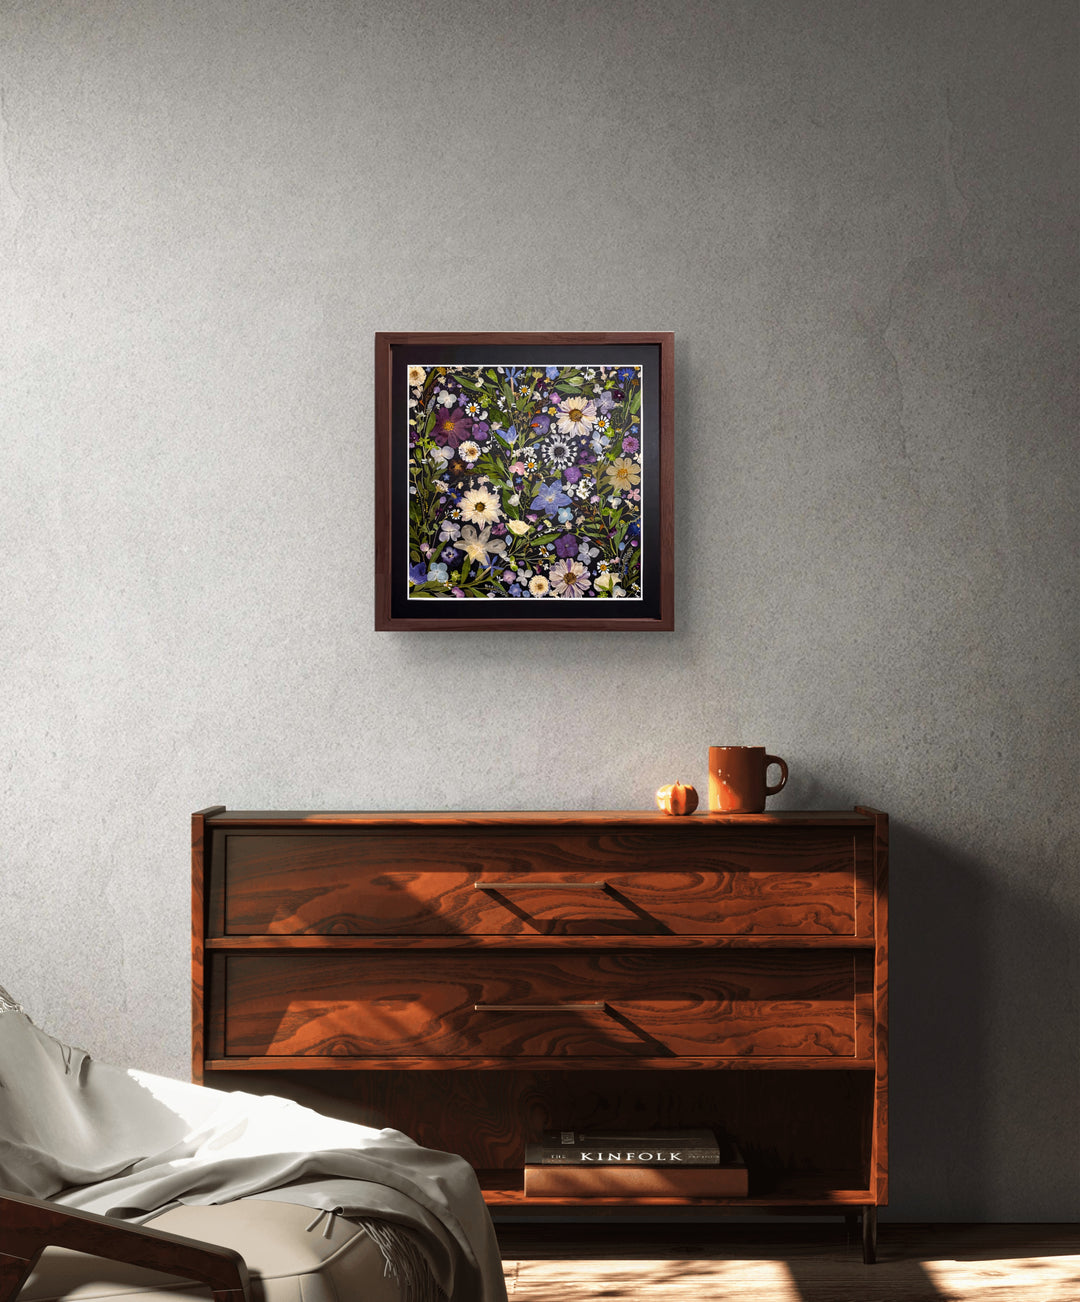 black background pressed flower frame art with flower petals hanging on the wall above a desk